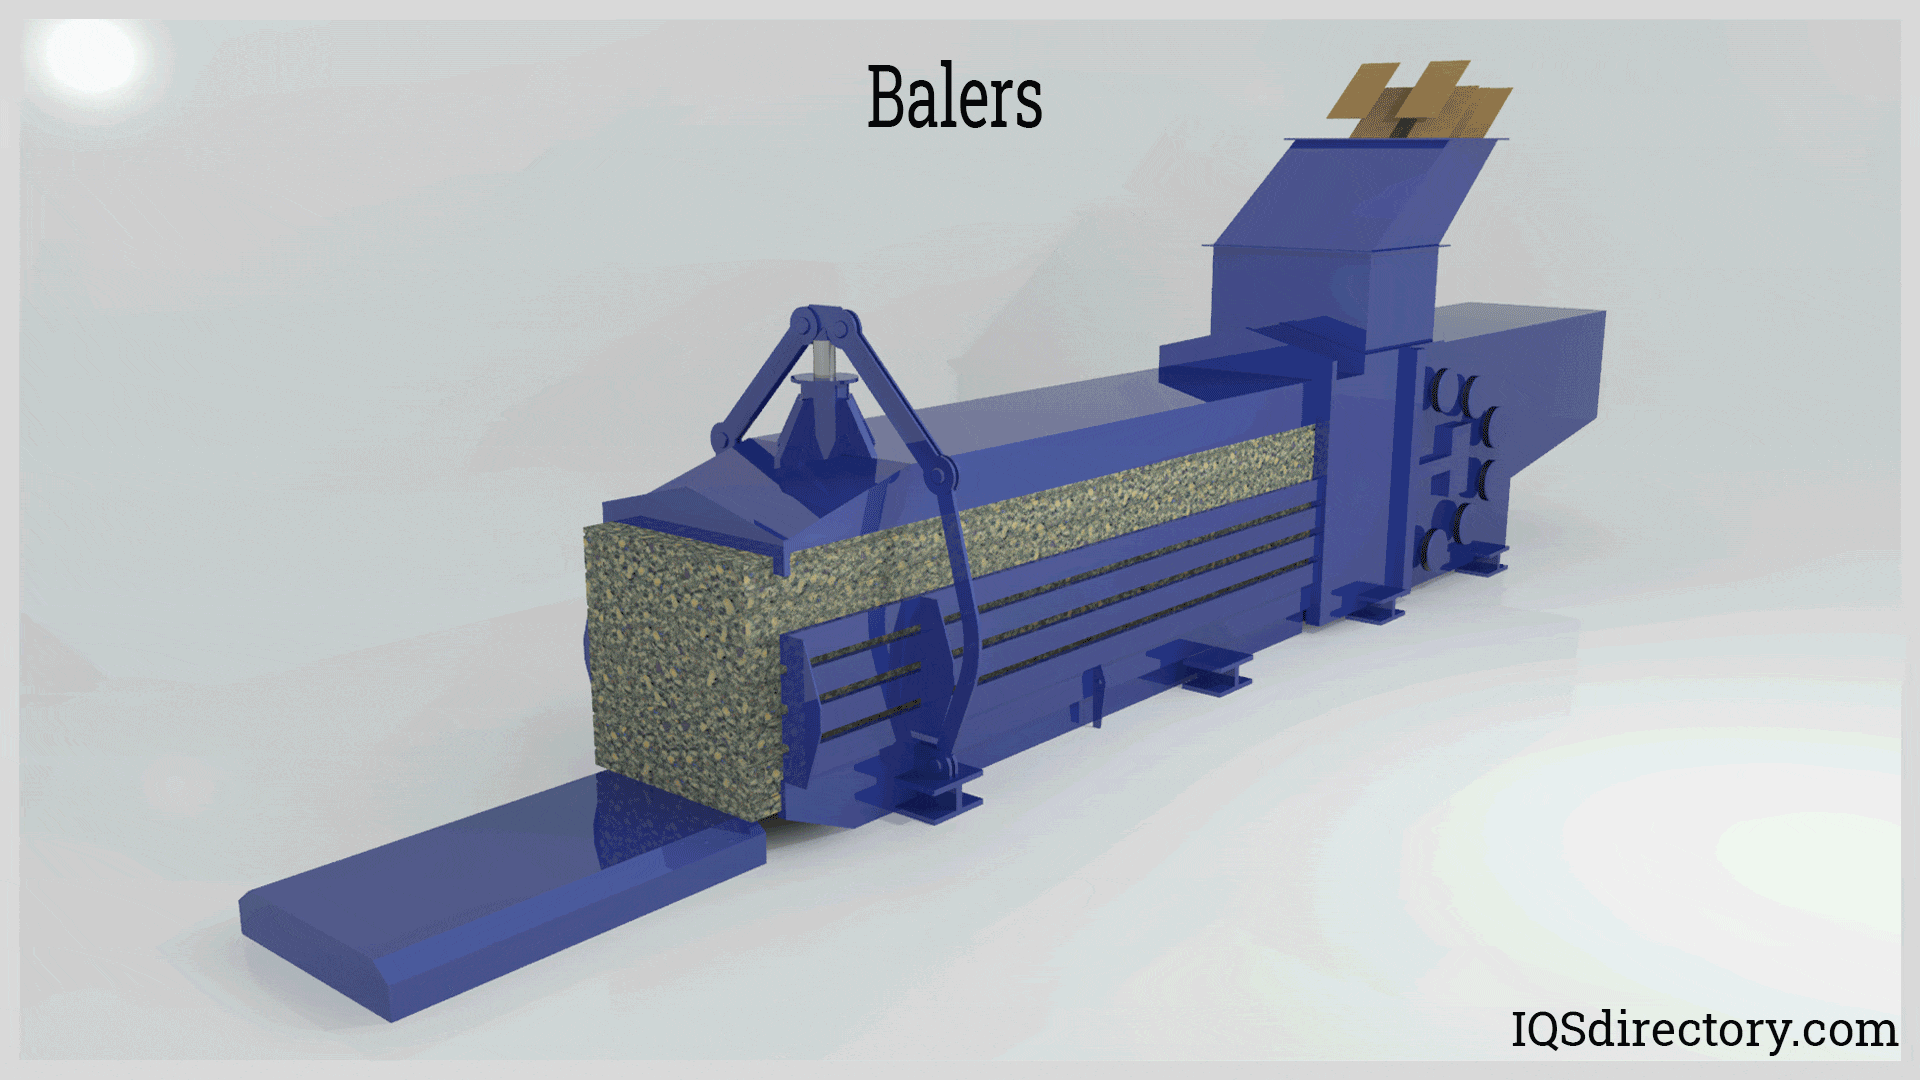 Baler Machines: What Are They? How Do They Work? Types & Parts